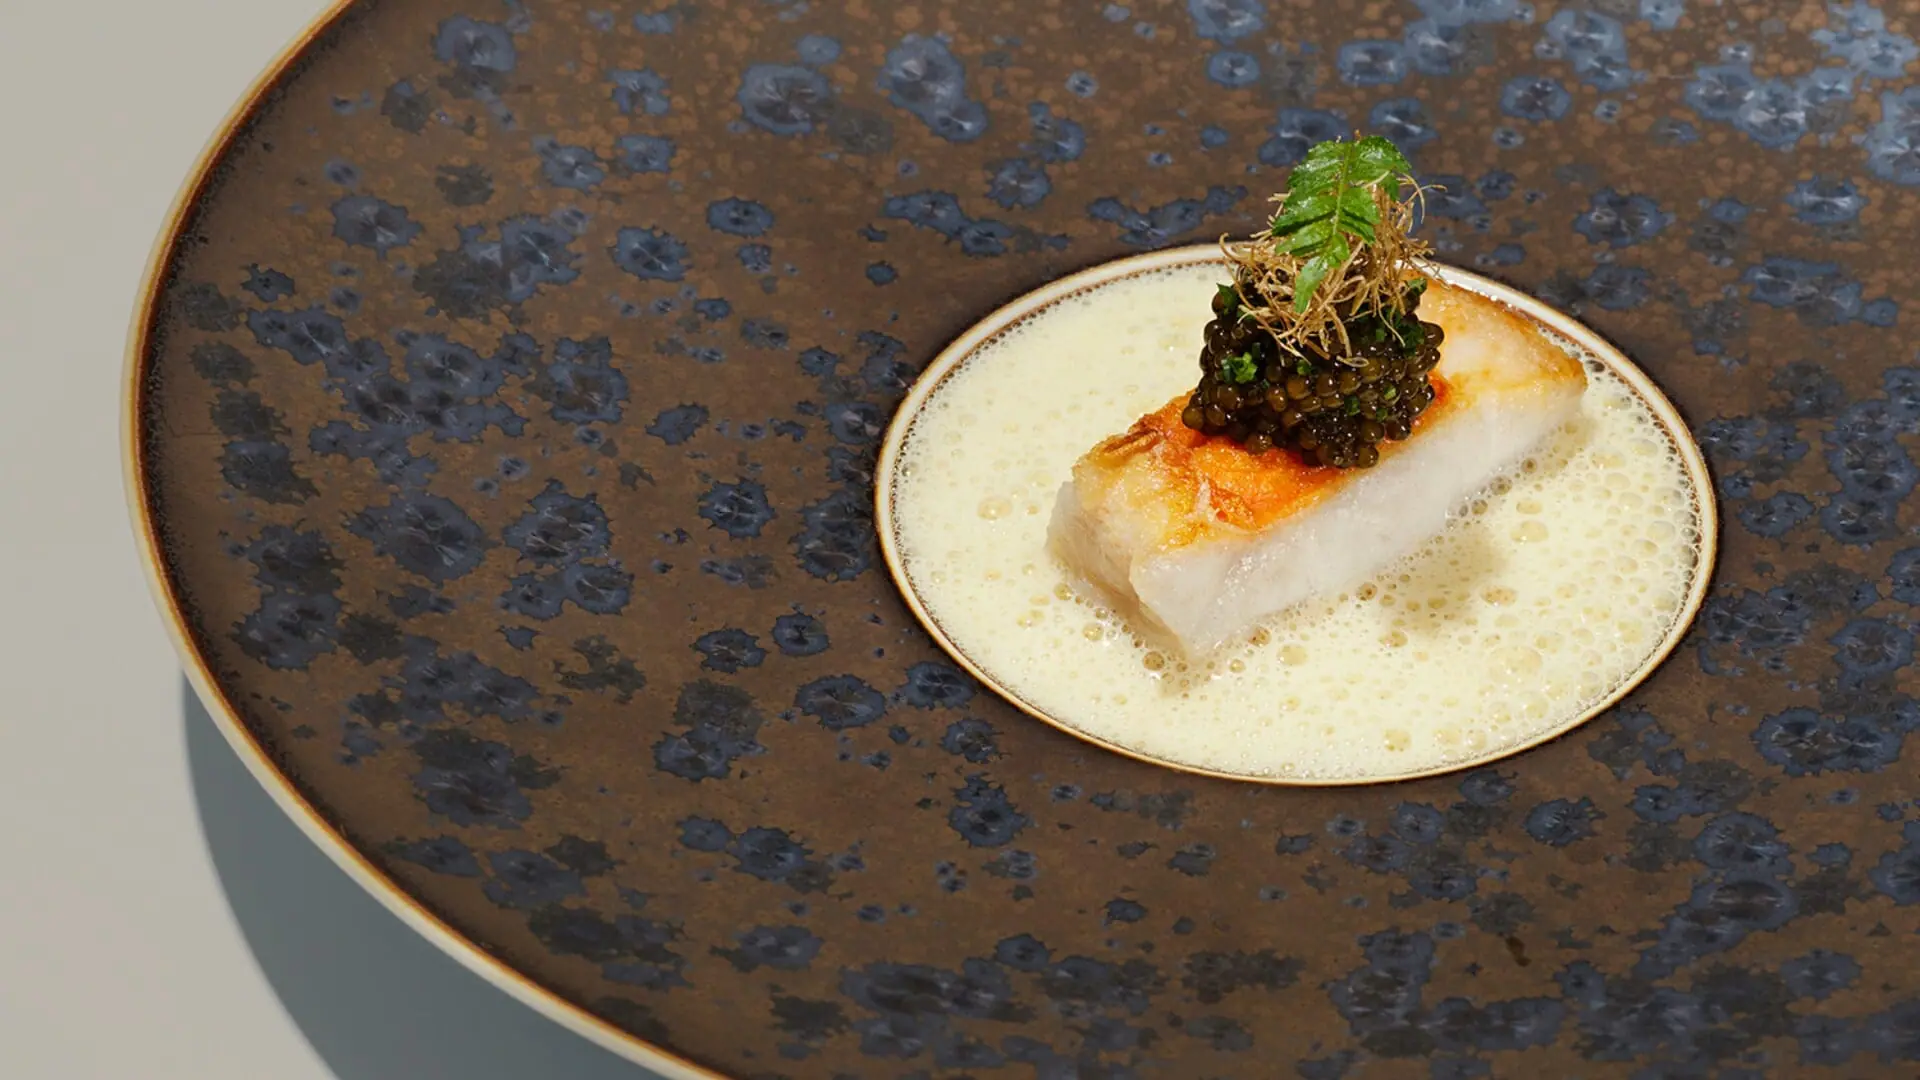 Two Michelin stars, two top chefs – The Twins conjure up a second star in  The Japanese Restaurant at The Chedi Andermatt